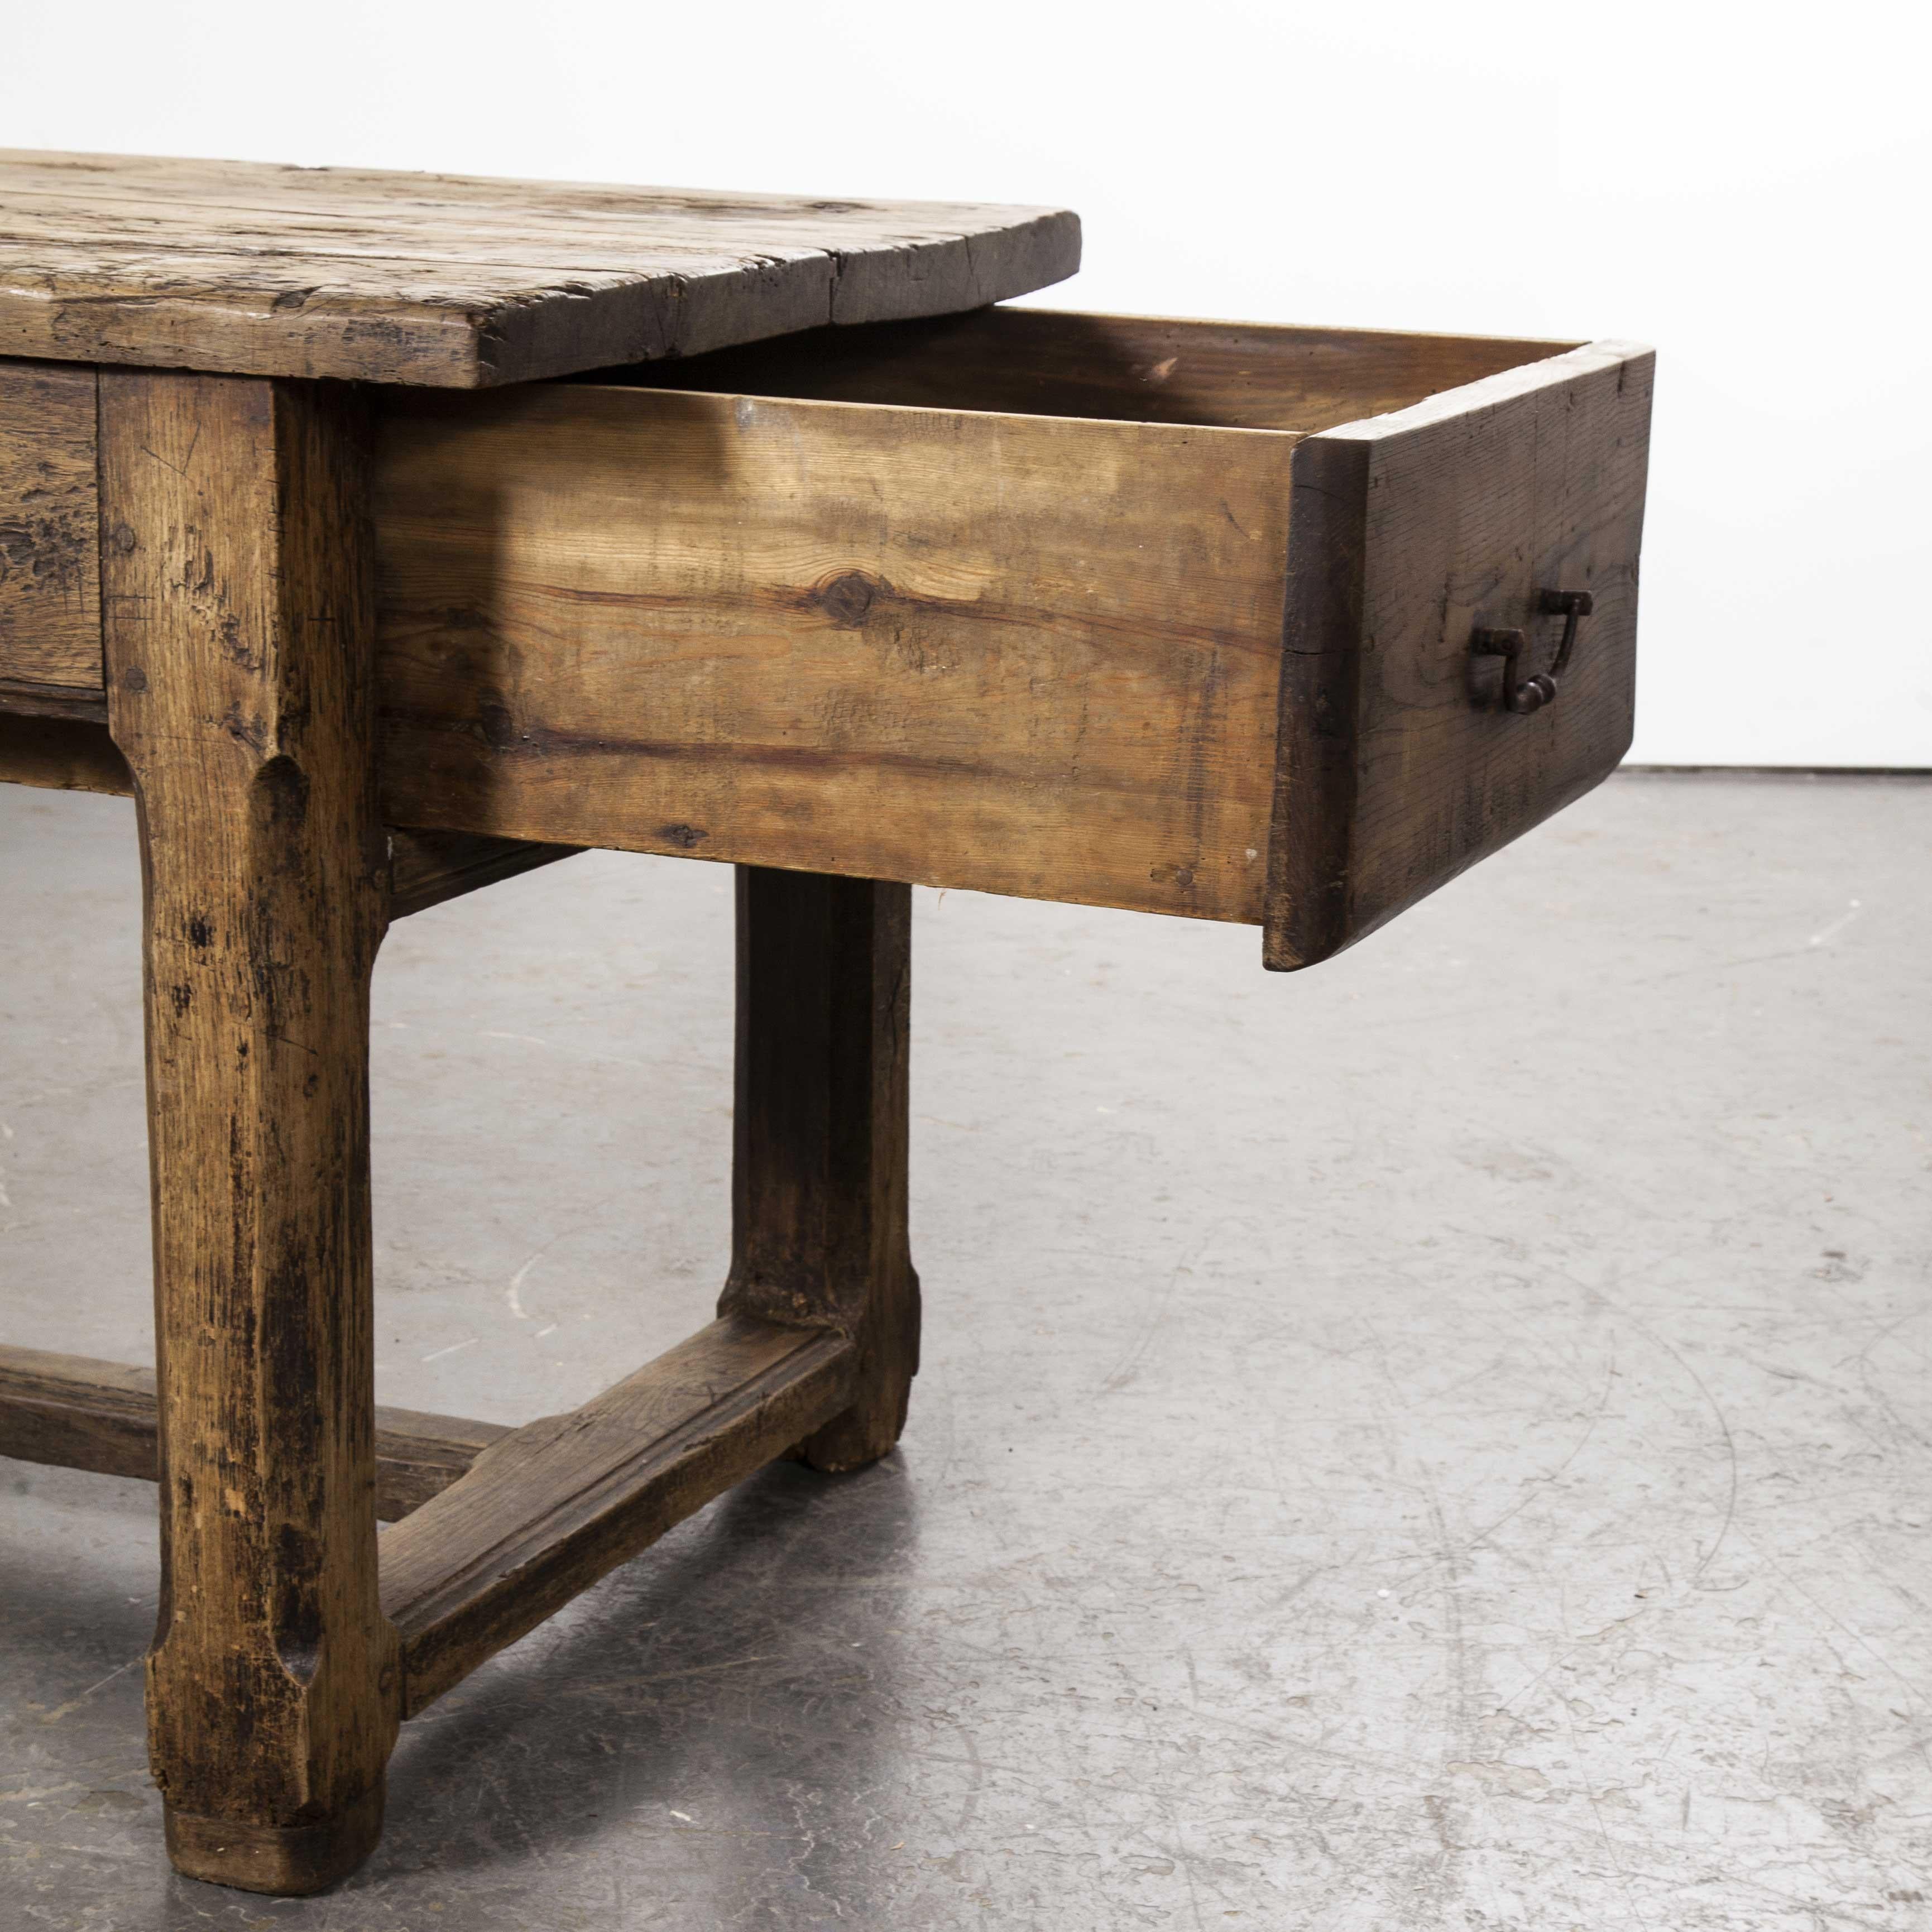 19th century original French Farmhouse rectangular dining table or console table

19th century original French Farmhouse rectangular dining table – console table. A substantial and heavy early 19th century table in excellent original condition.